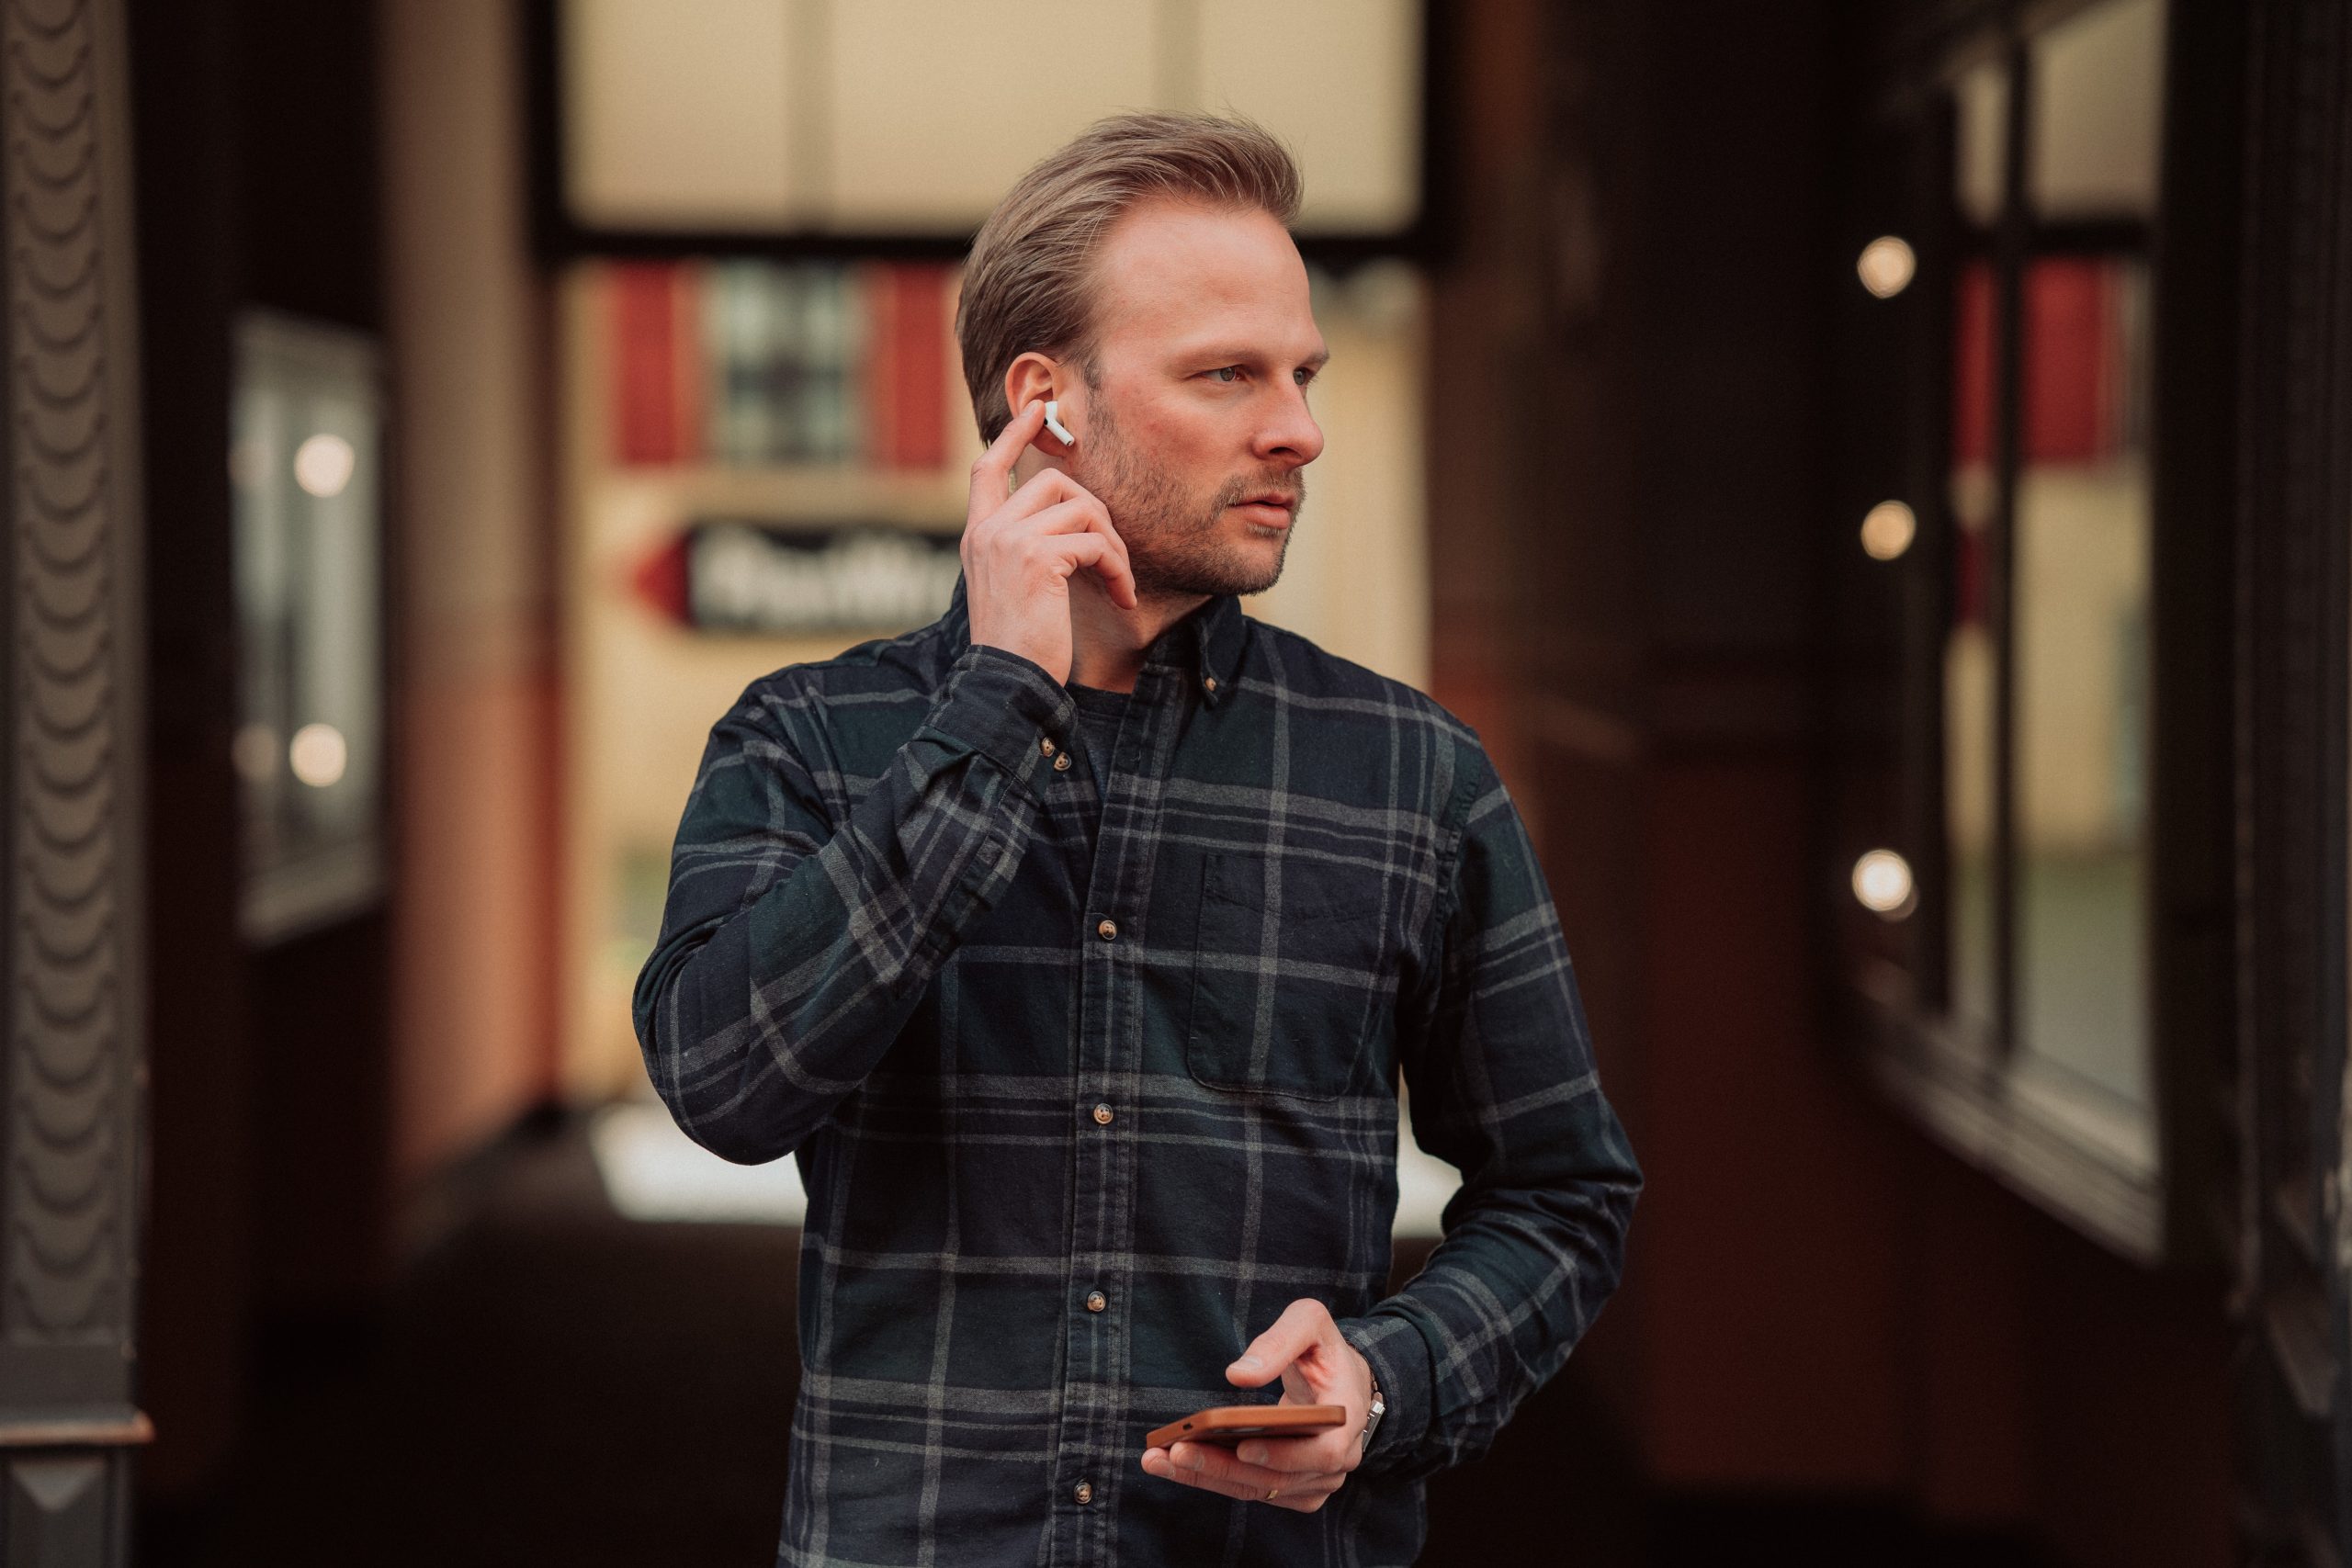 Man in a plaid shirt with a phone in one hand. The other hand is adjusting an Airpod in his ear.